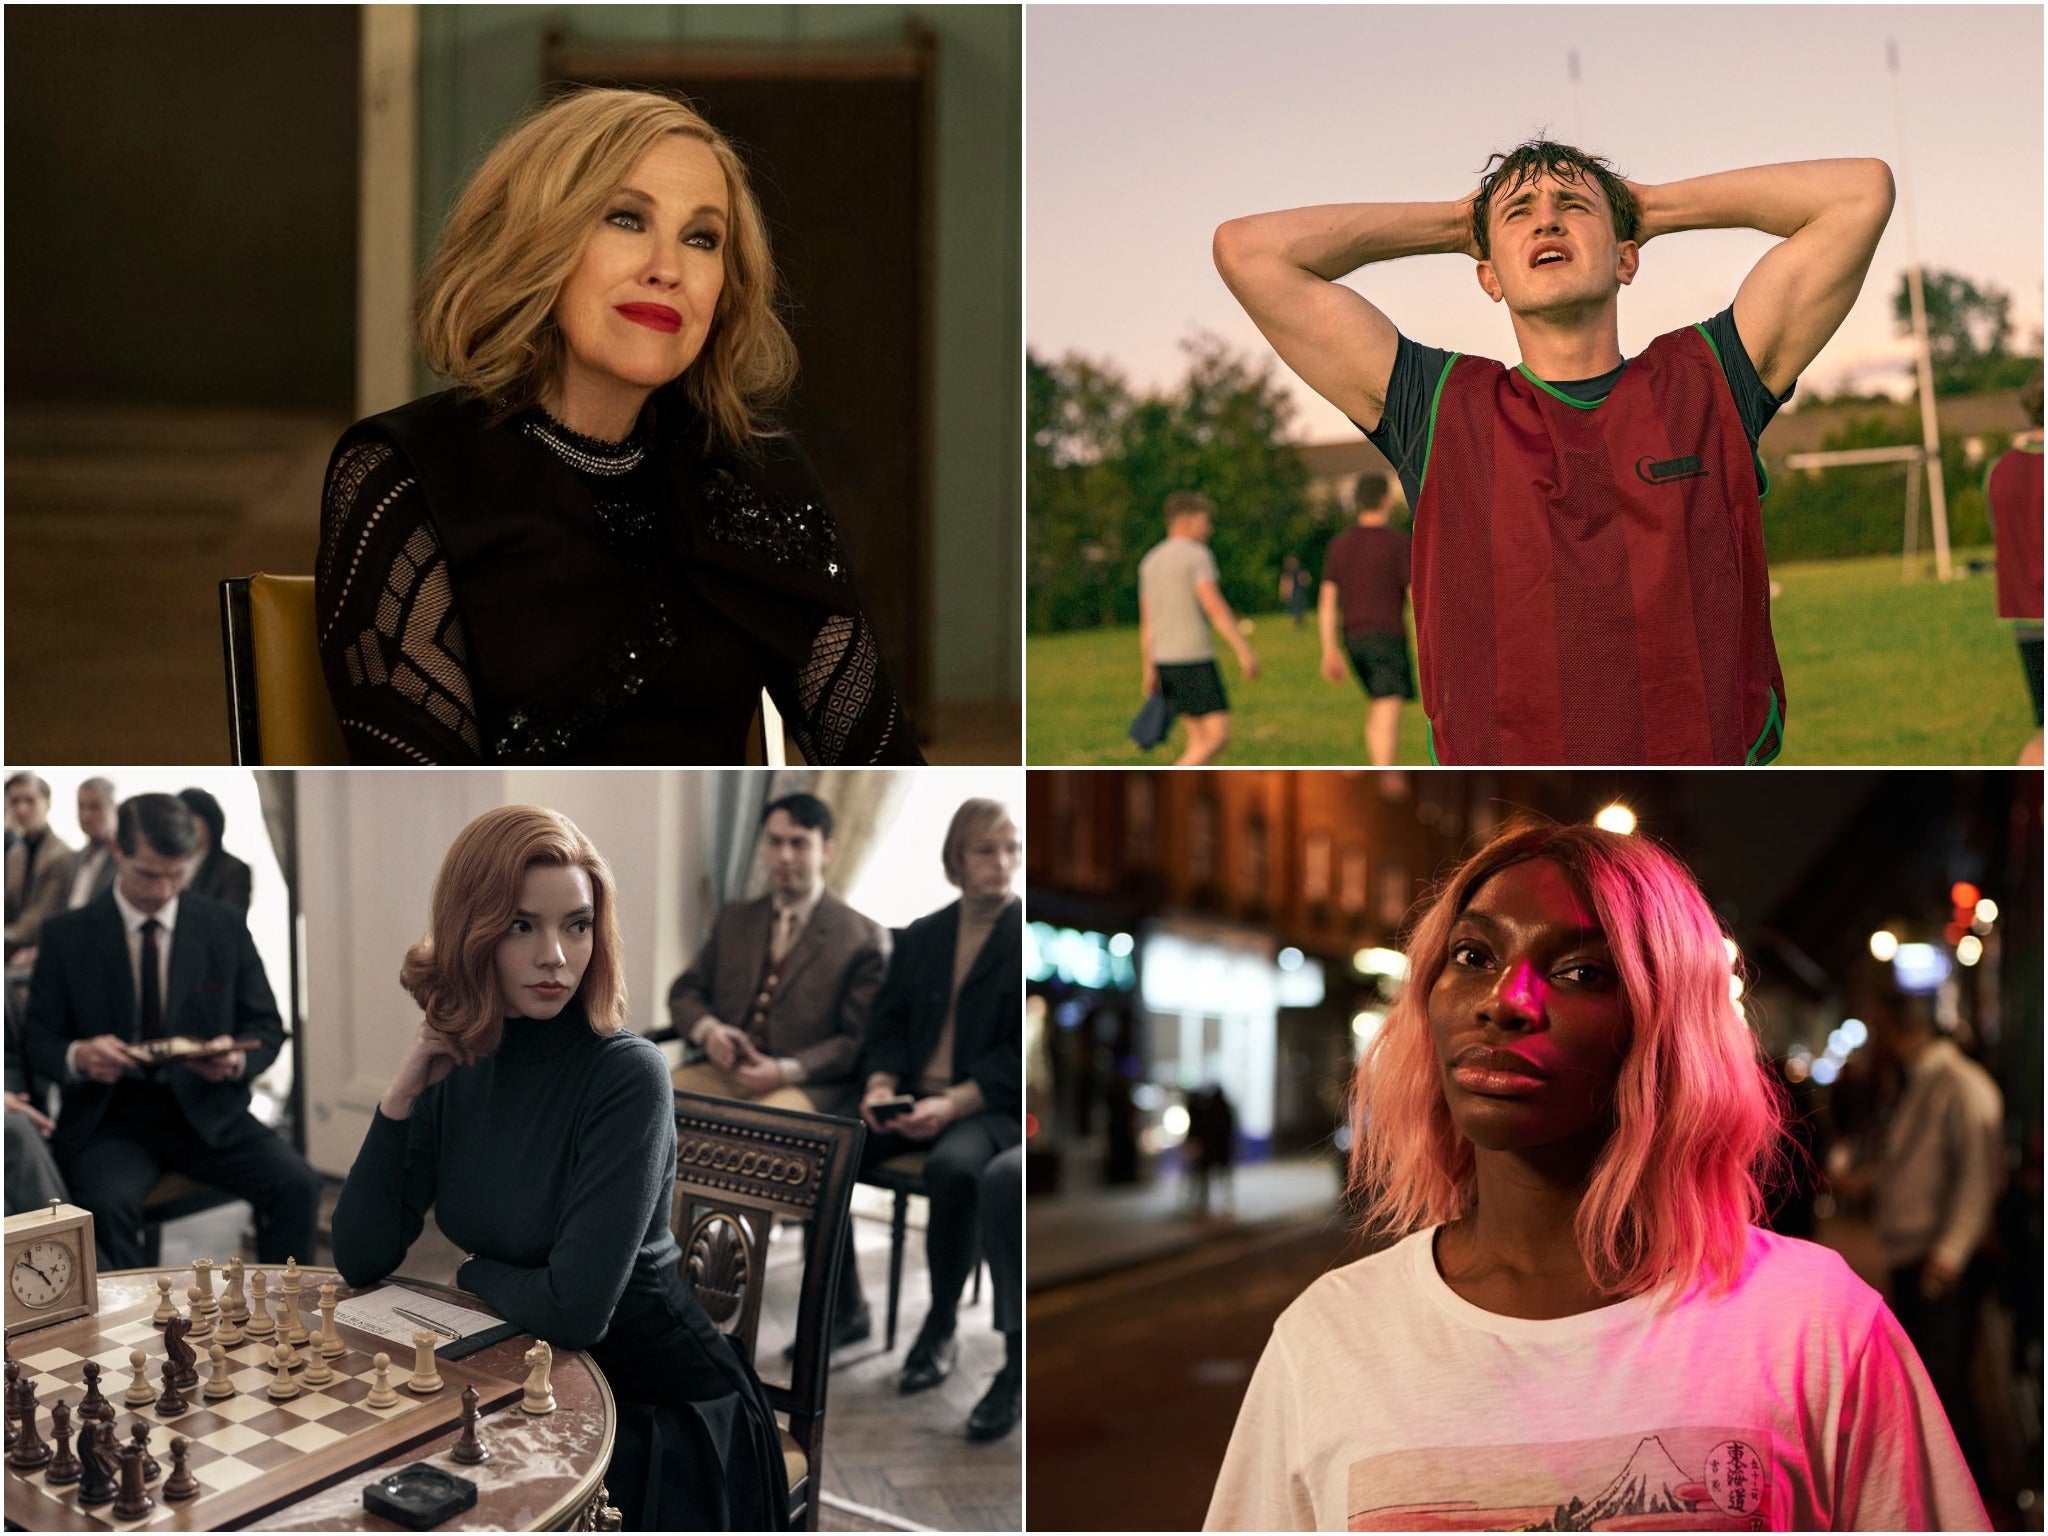 Clockwise from top left: Catherine O’ Hara in Schitt’s Creek, Paul Mescal in Normal People, Michaela Coel in I May Destroy You and Anya Taylor Joy in The Queen’s Gambit